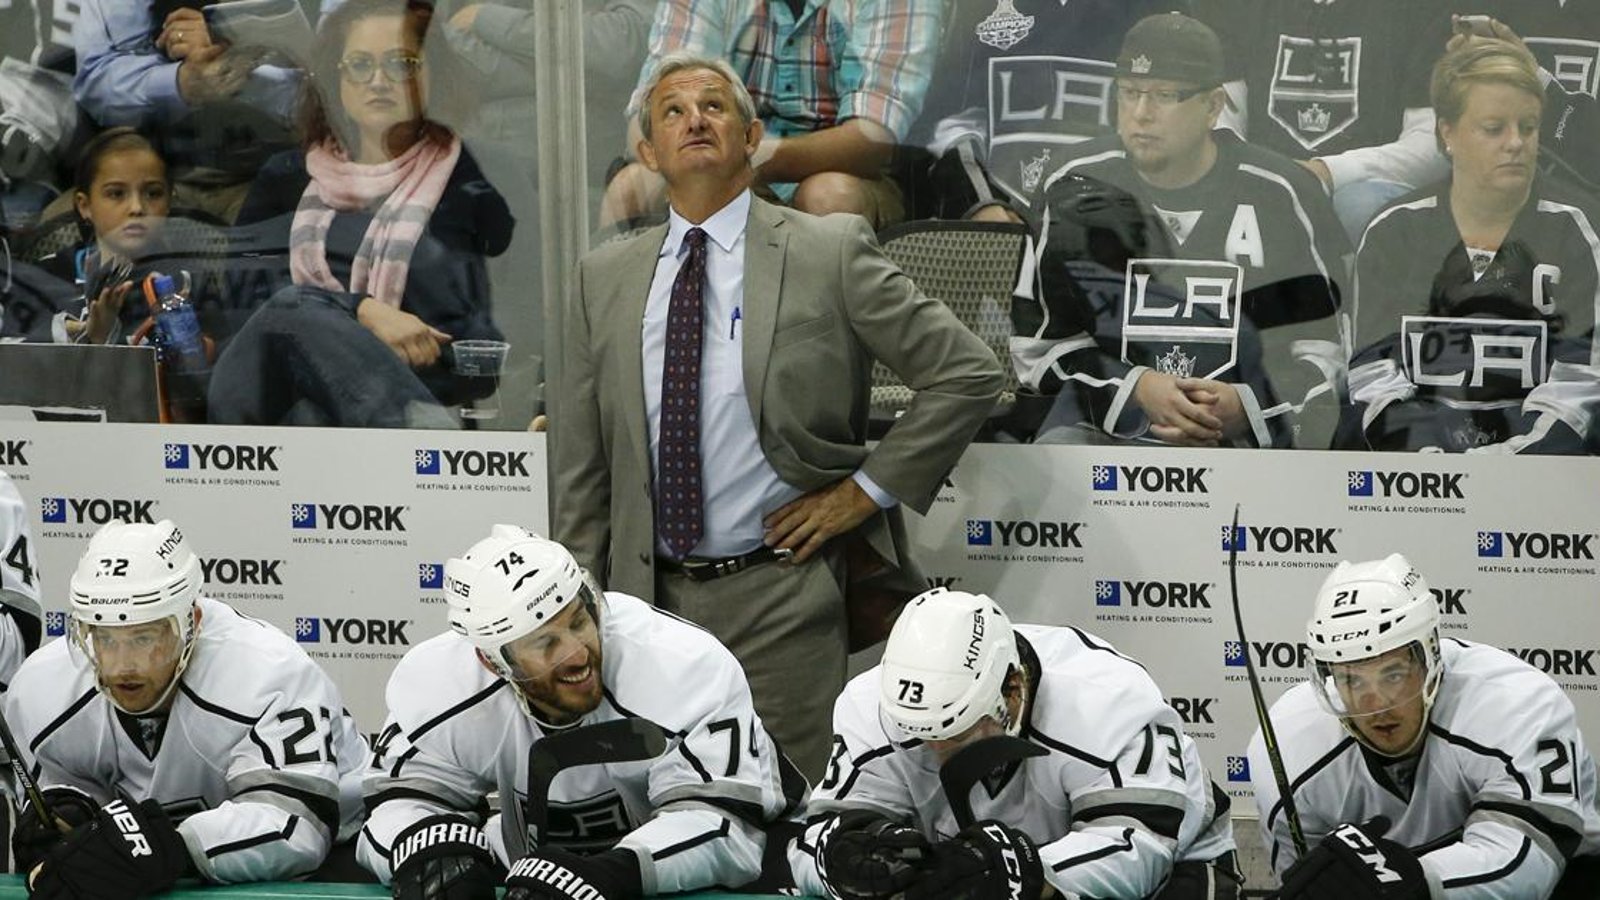 BREAKING : Kings about to hire coach replacement. 